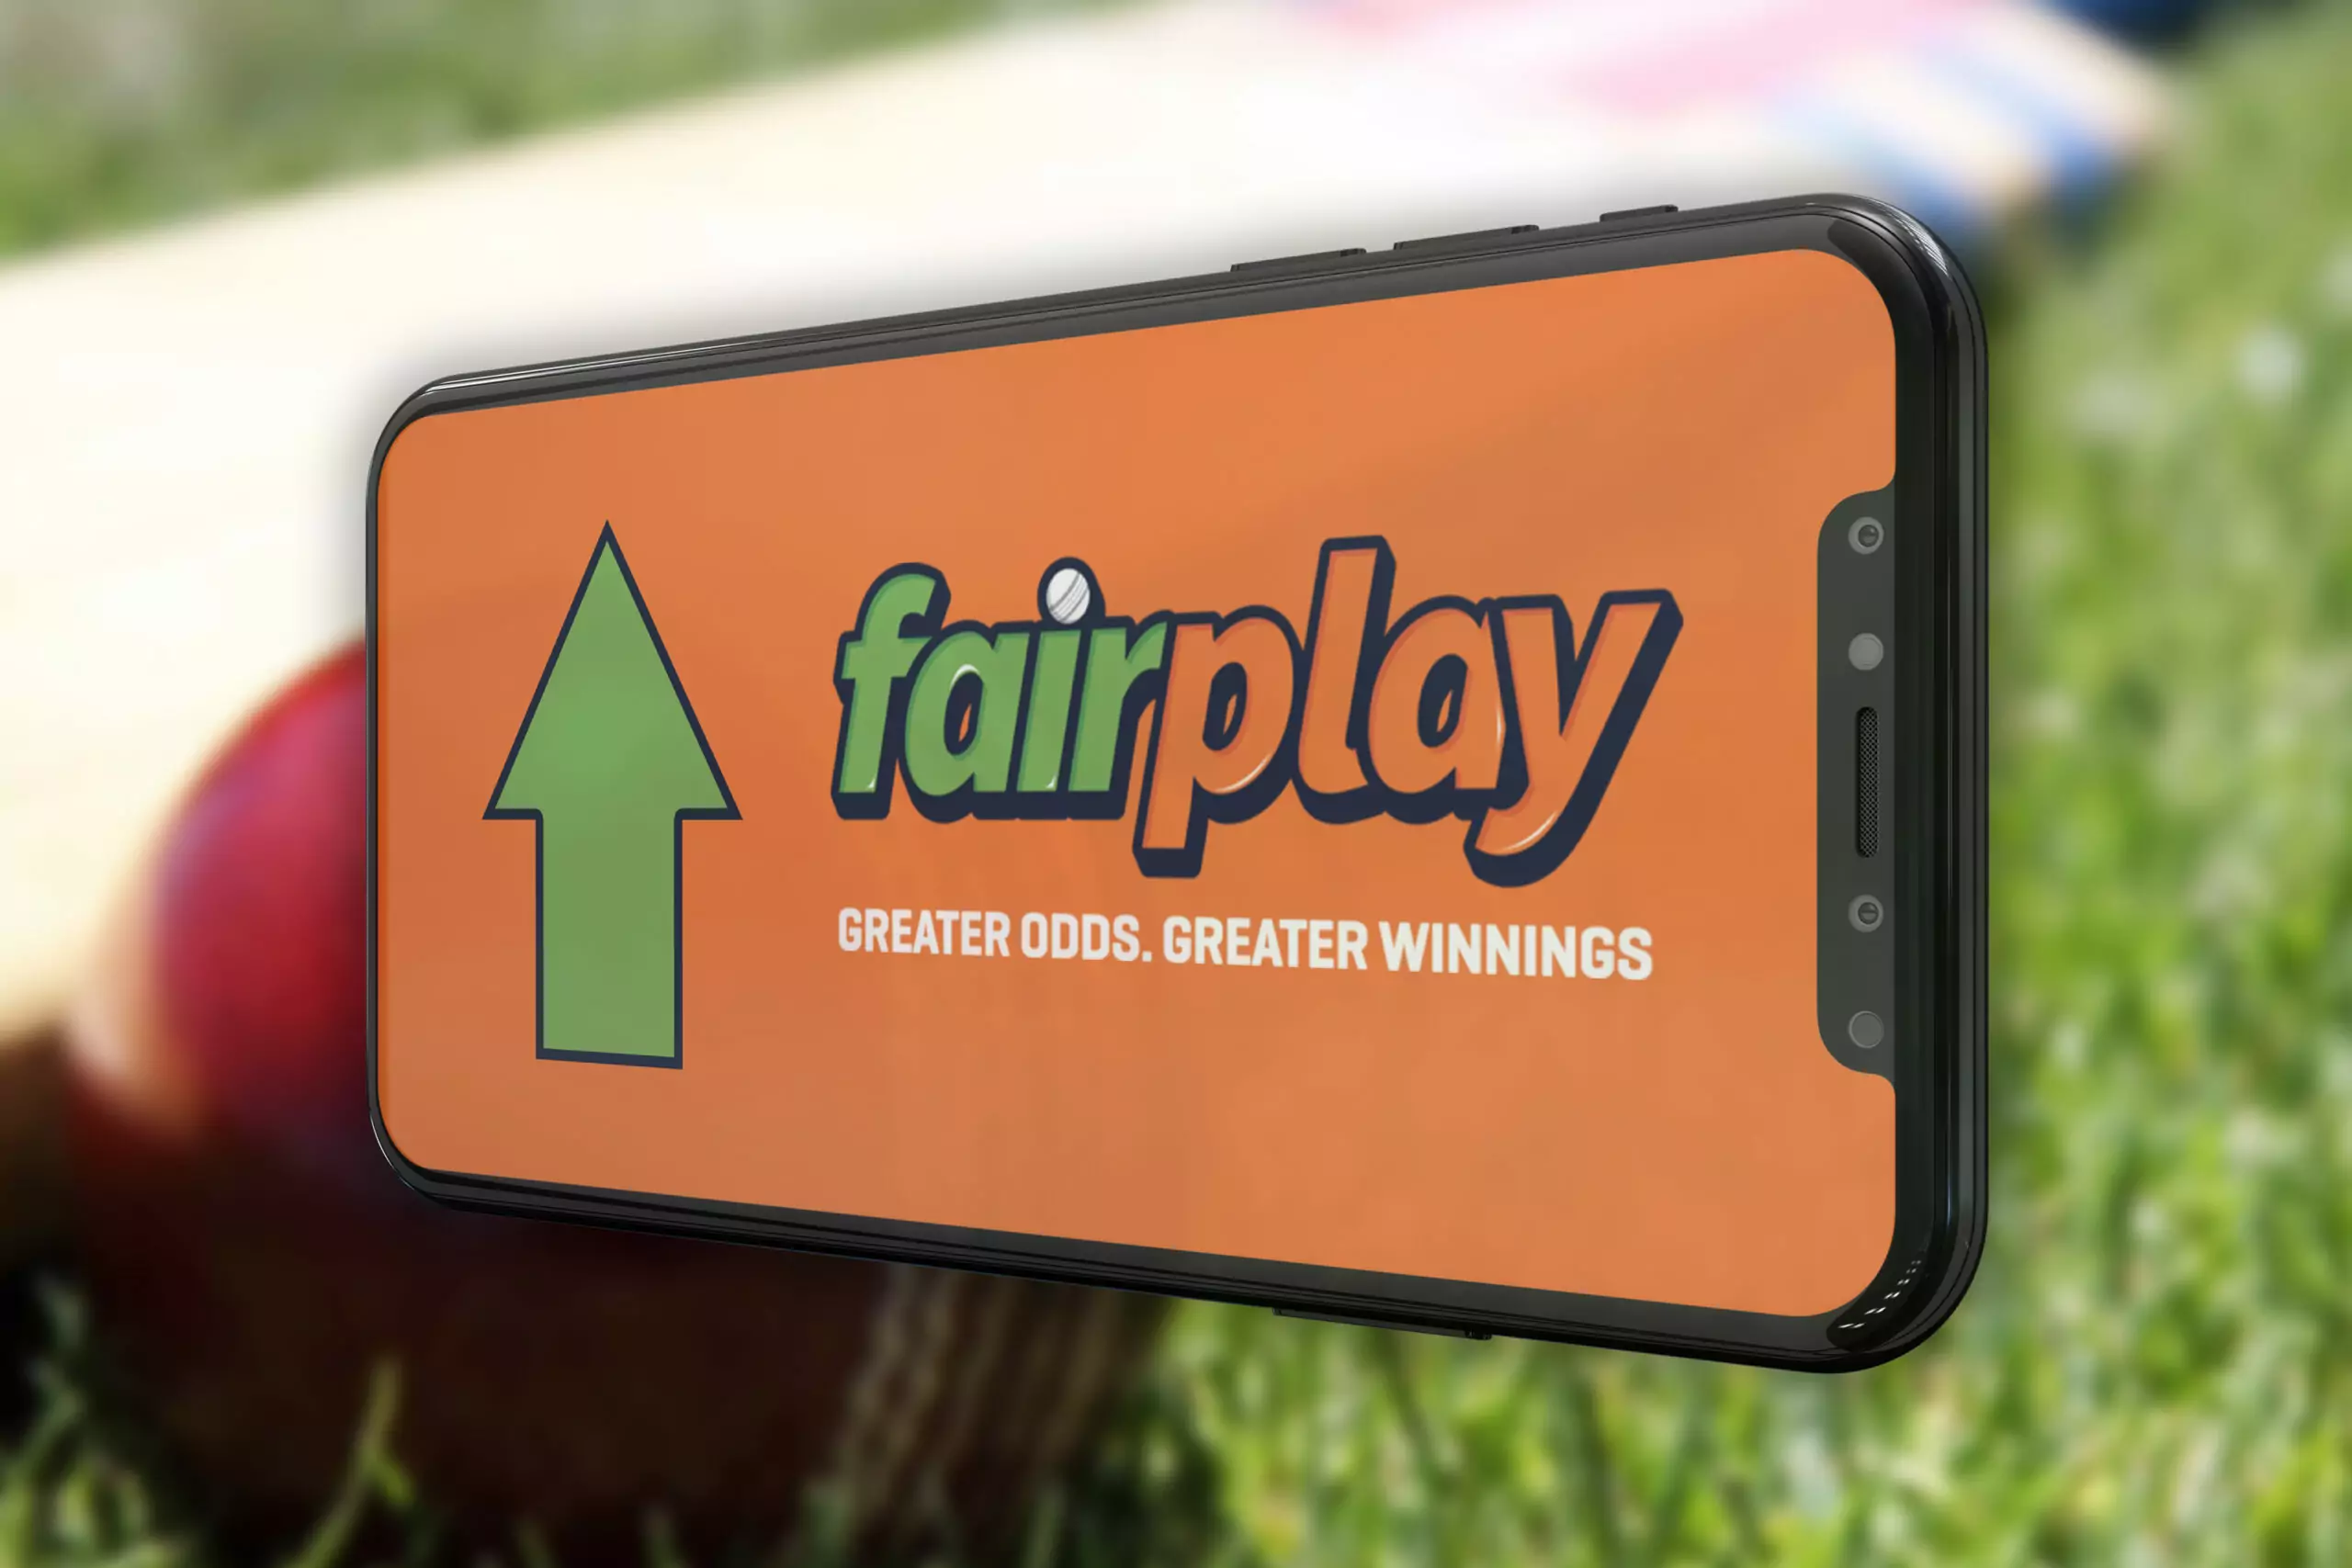 The Fairplay app has a number of upsides for sports betting.